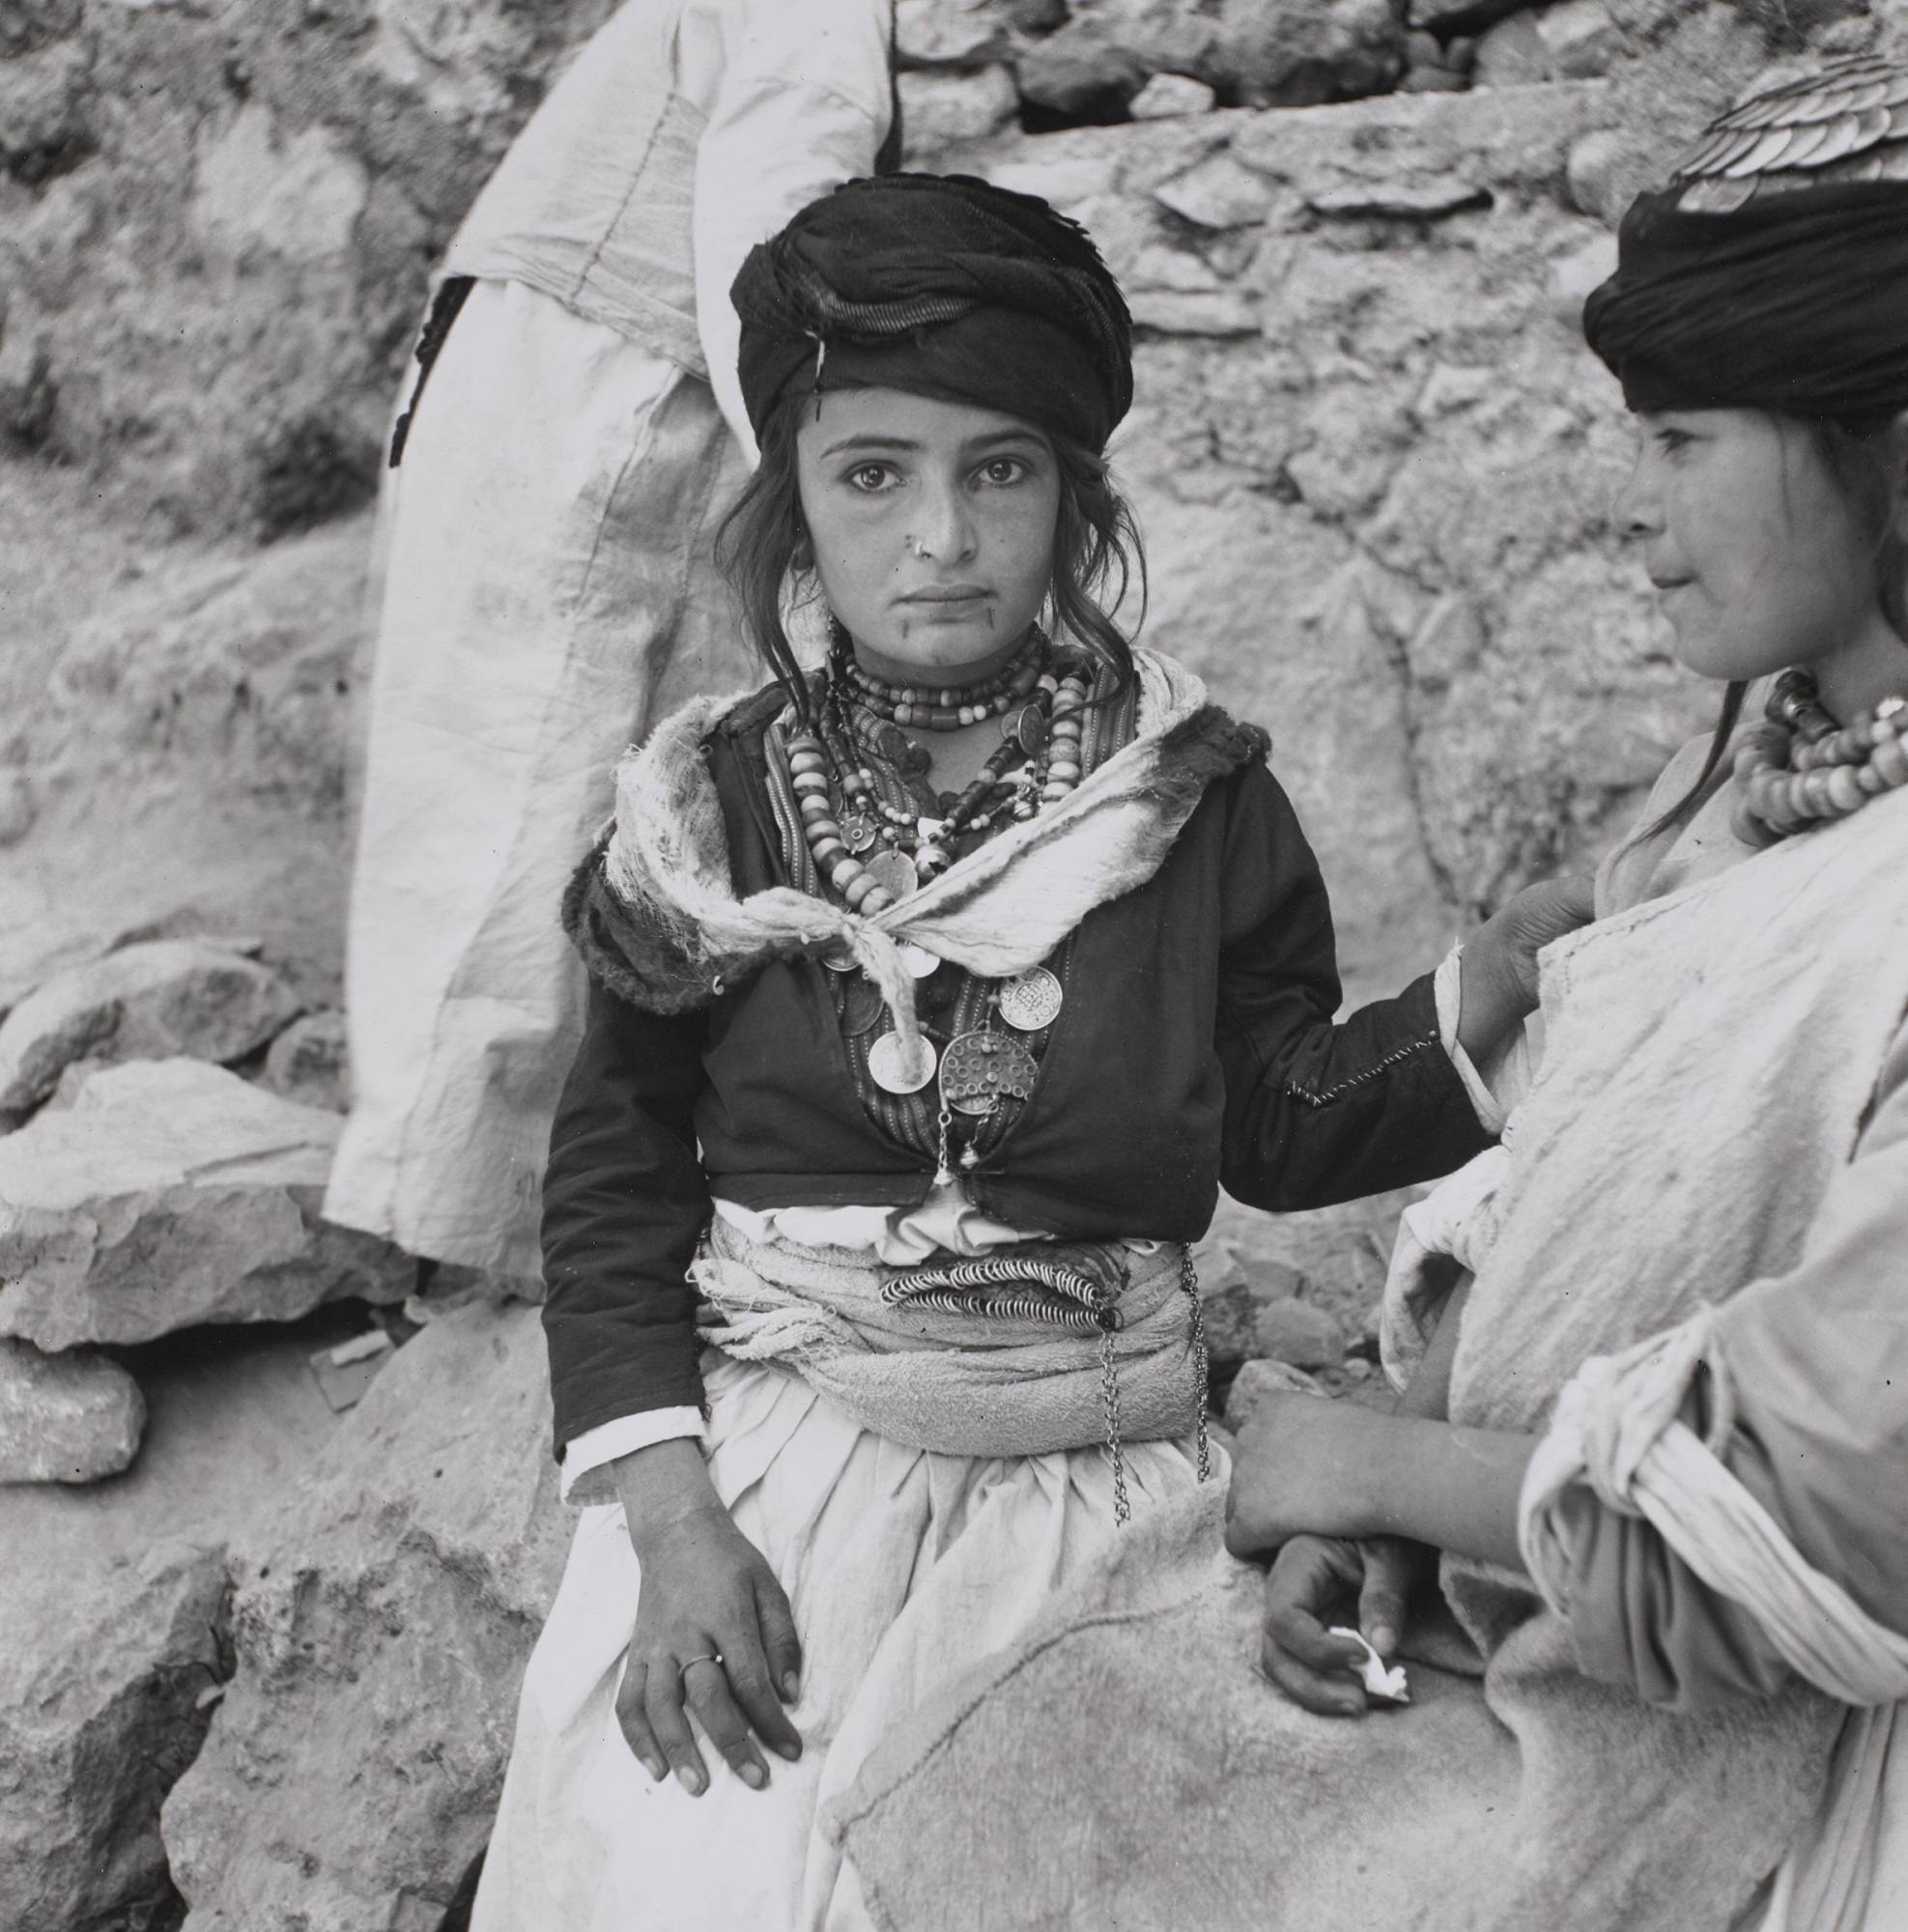 Anthony Kersting, 'Yazidi People in Kurdistan', 1944-46, Released under a Creative Commons CCBYNC license